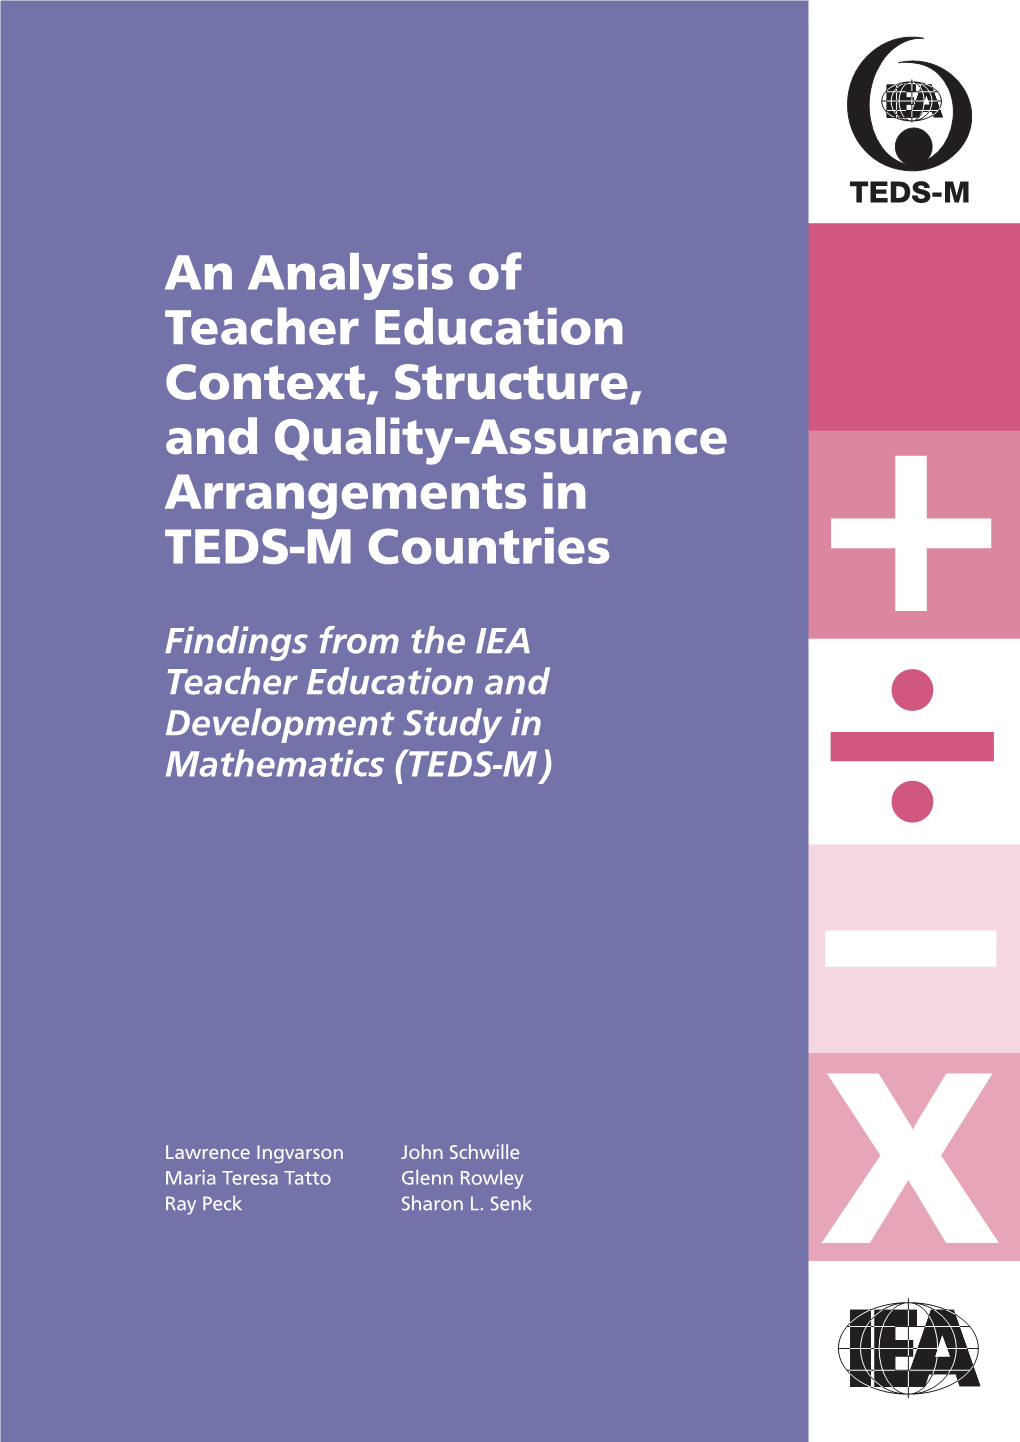 An Analysis of Teacher Education Context, Structure, and Quality-Assurance Arrangements in TEDS-M Countries